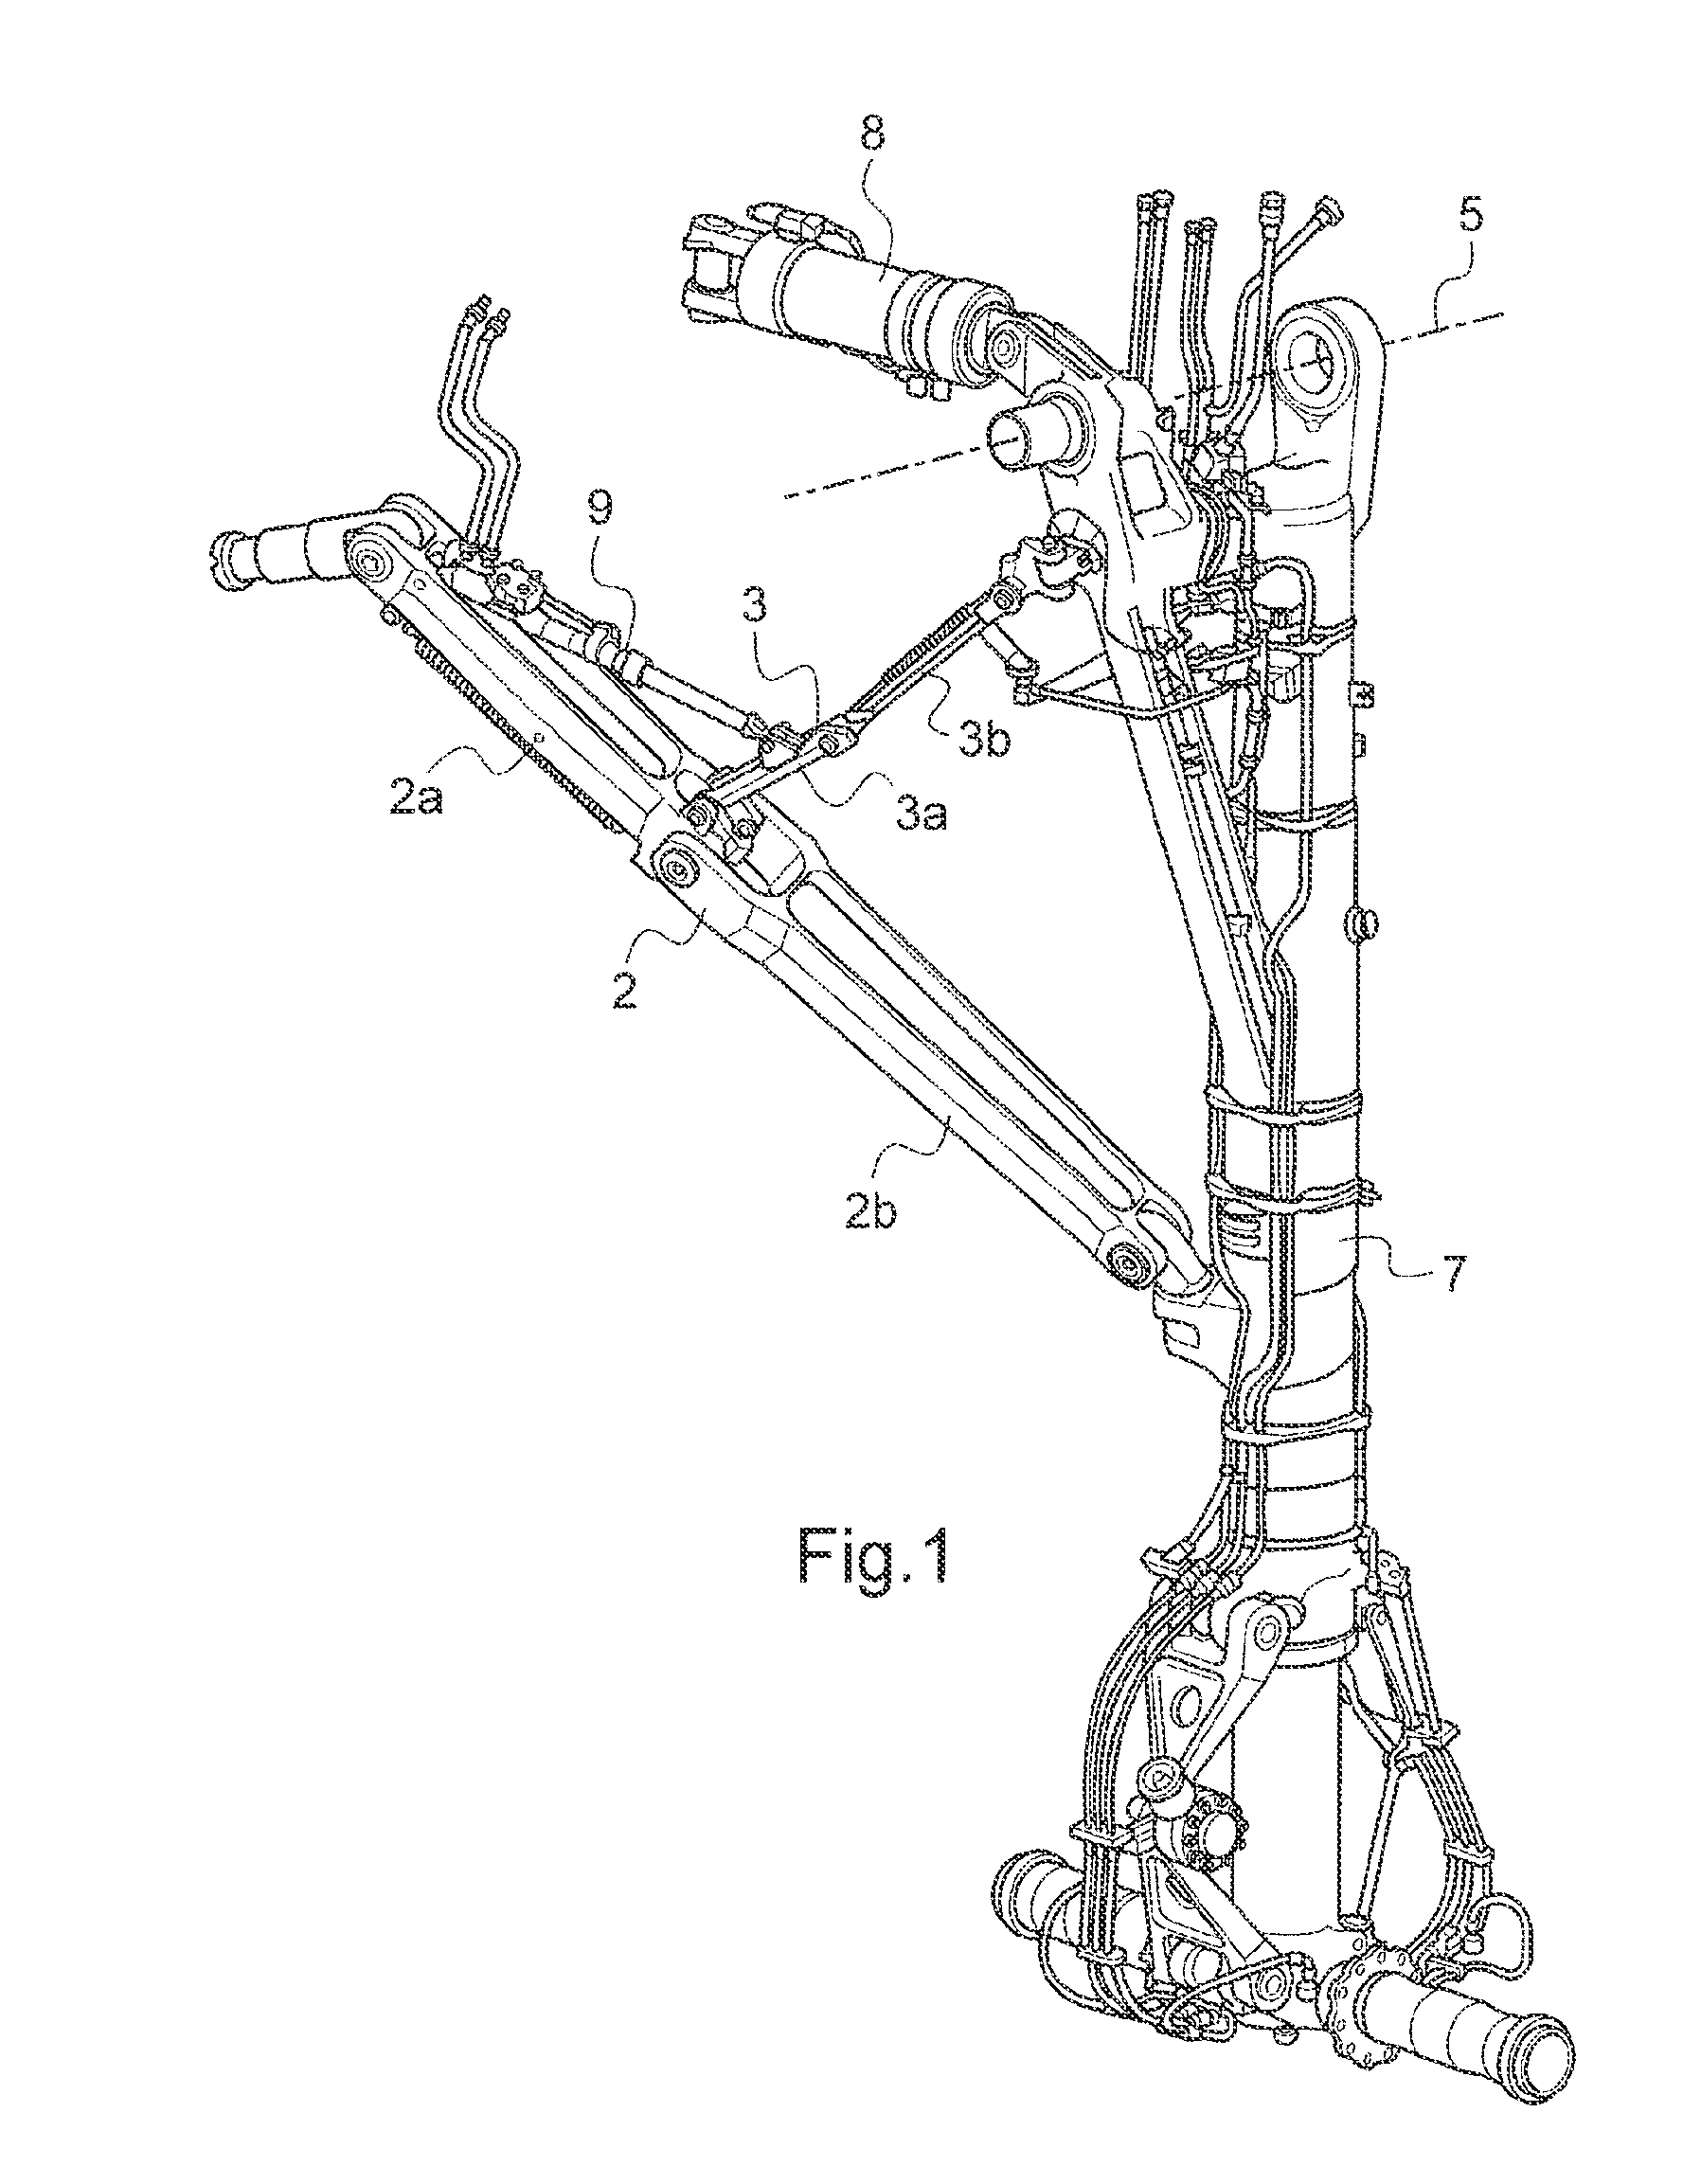 A device for unlocking an undercarriage in a deployed position, and an undercarriage fitted with such a device